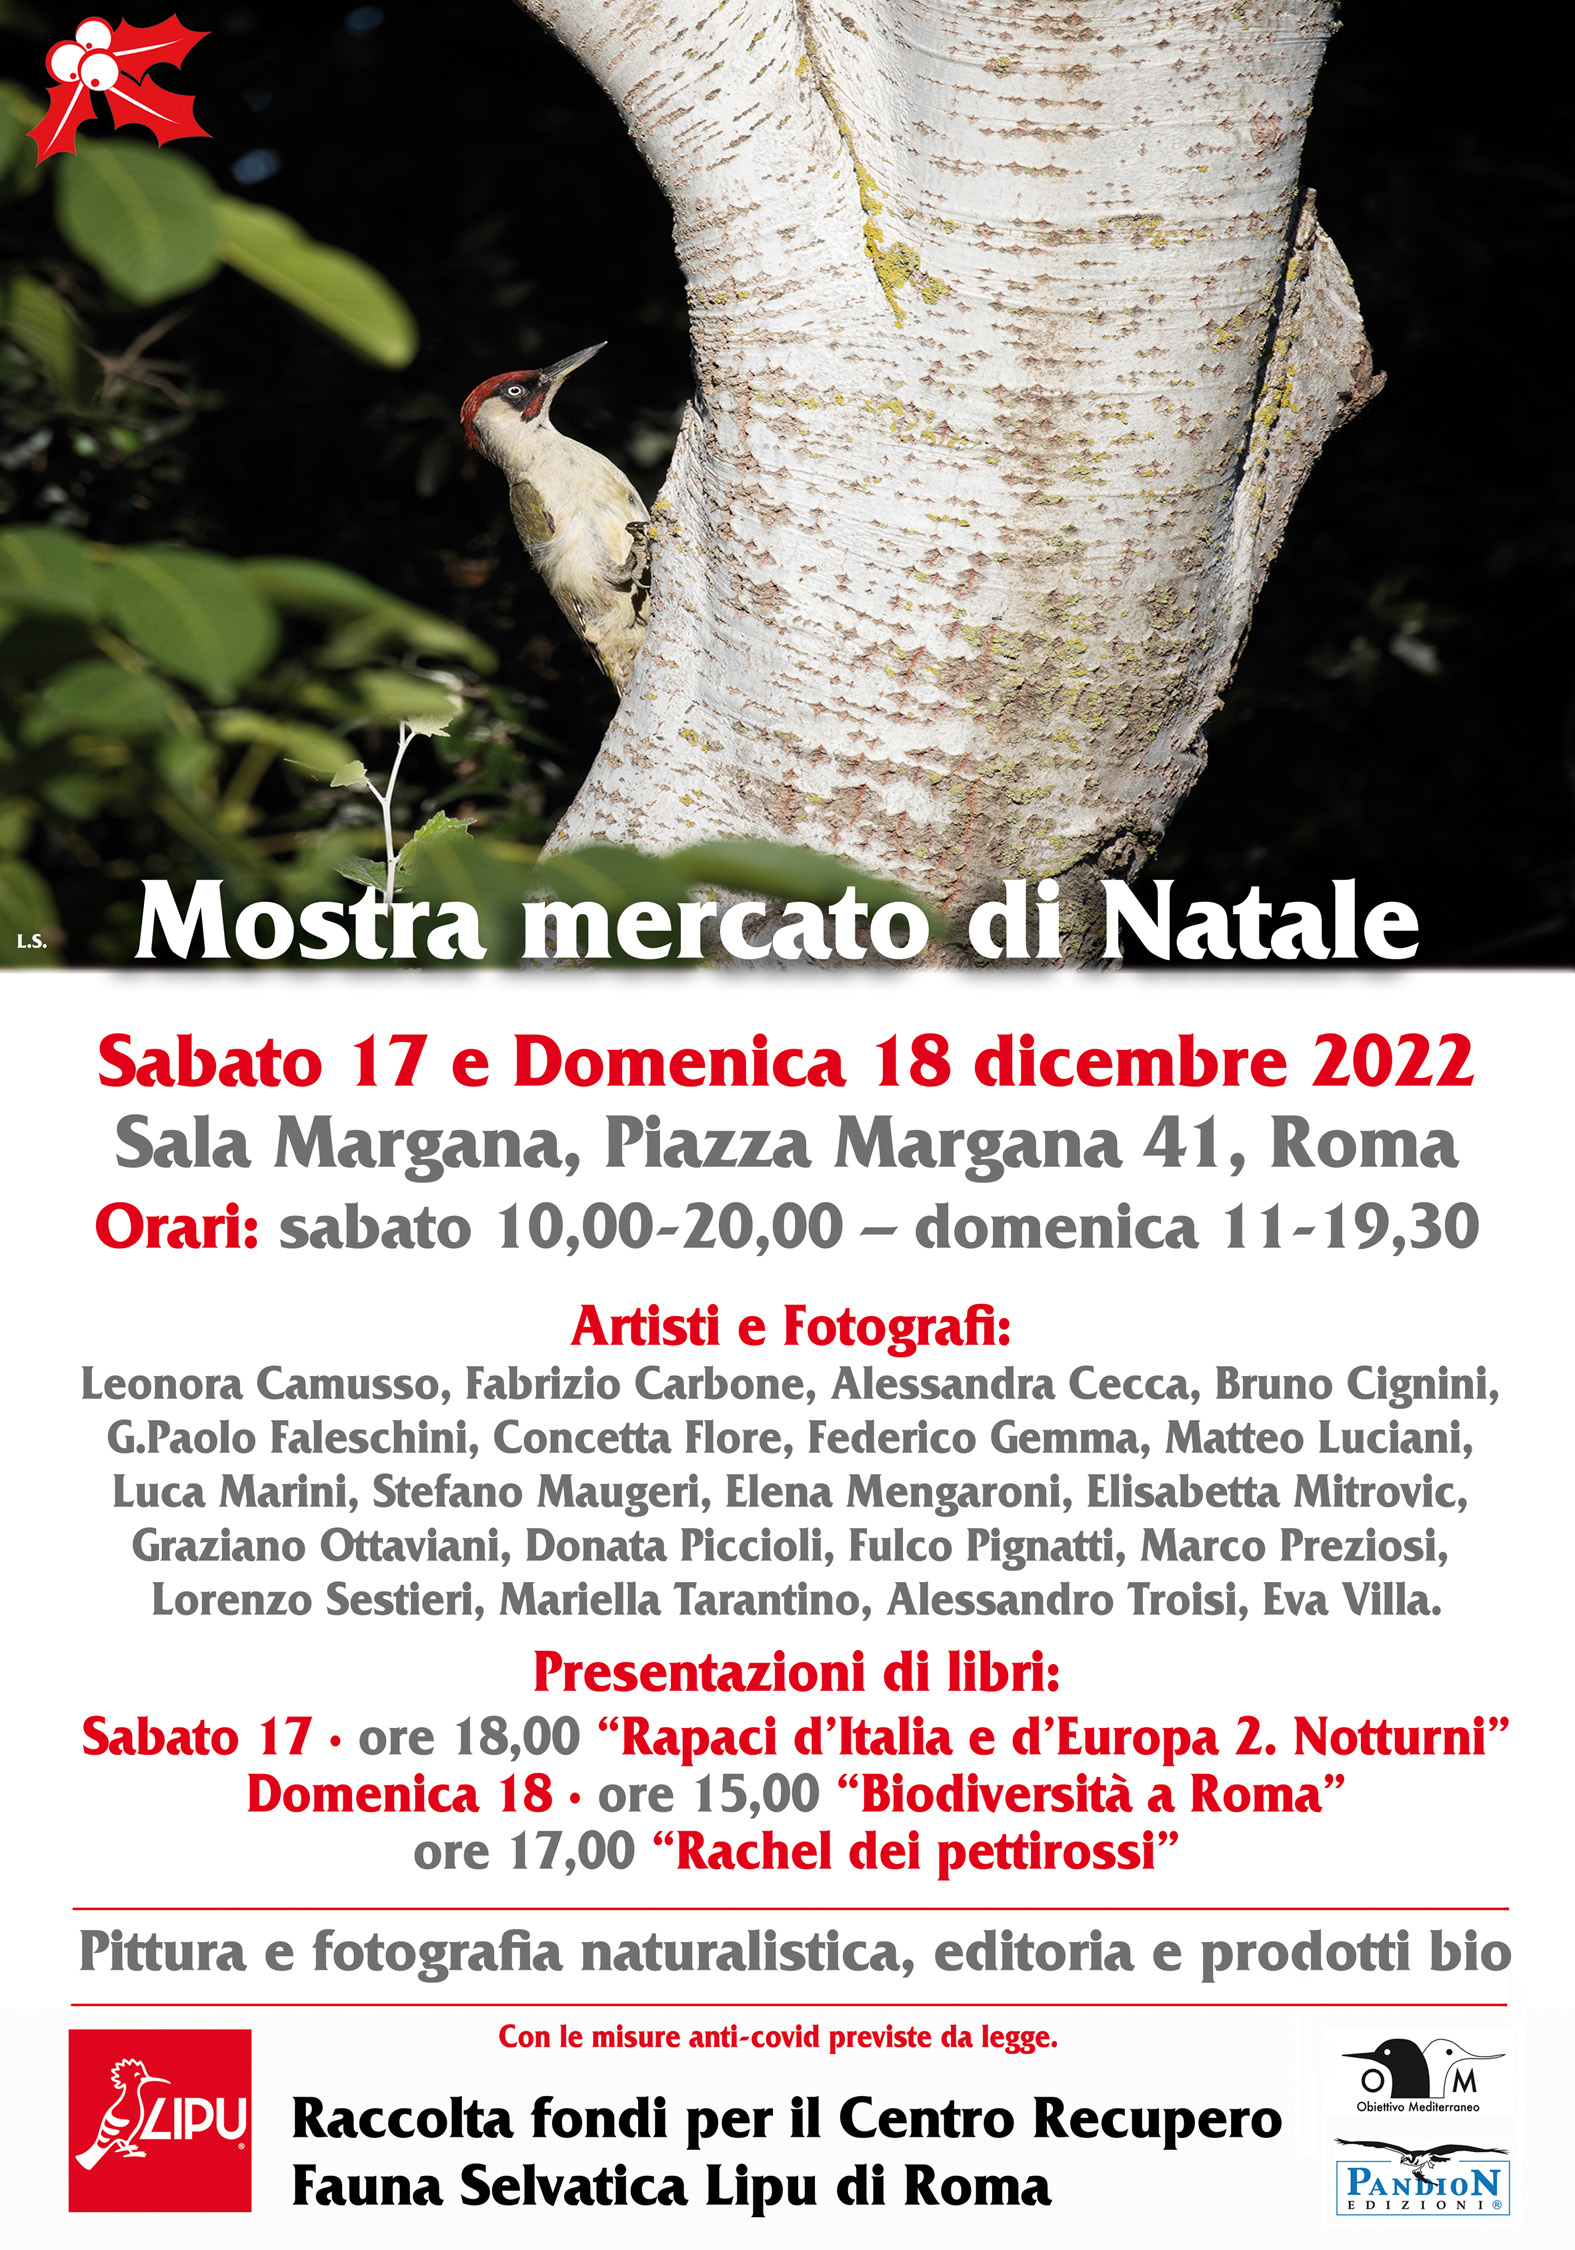 December 2022, on Saturday 17 (10 am to 8 pm) and Sunday 18 (11am to 7:30 pm), at Sala Margana in Piazza Margana 41 in Rome, Christmas Fundraising Market, to support the Centro Recupero Fauna Selvatica Lipu di Roma. Wildlife photography and paintings, books and organic food.